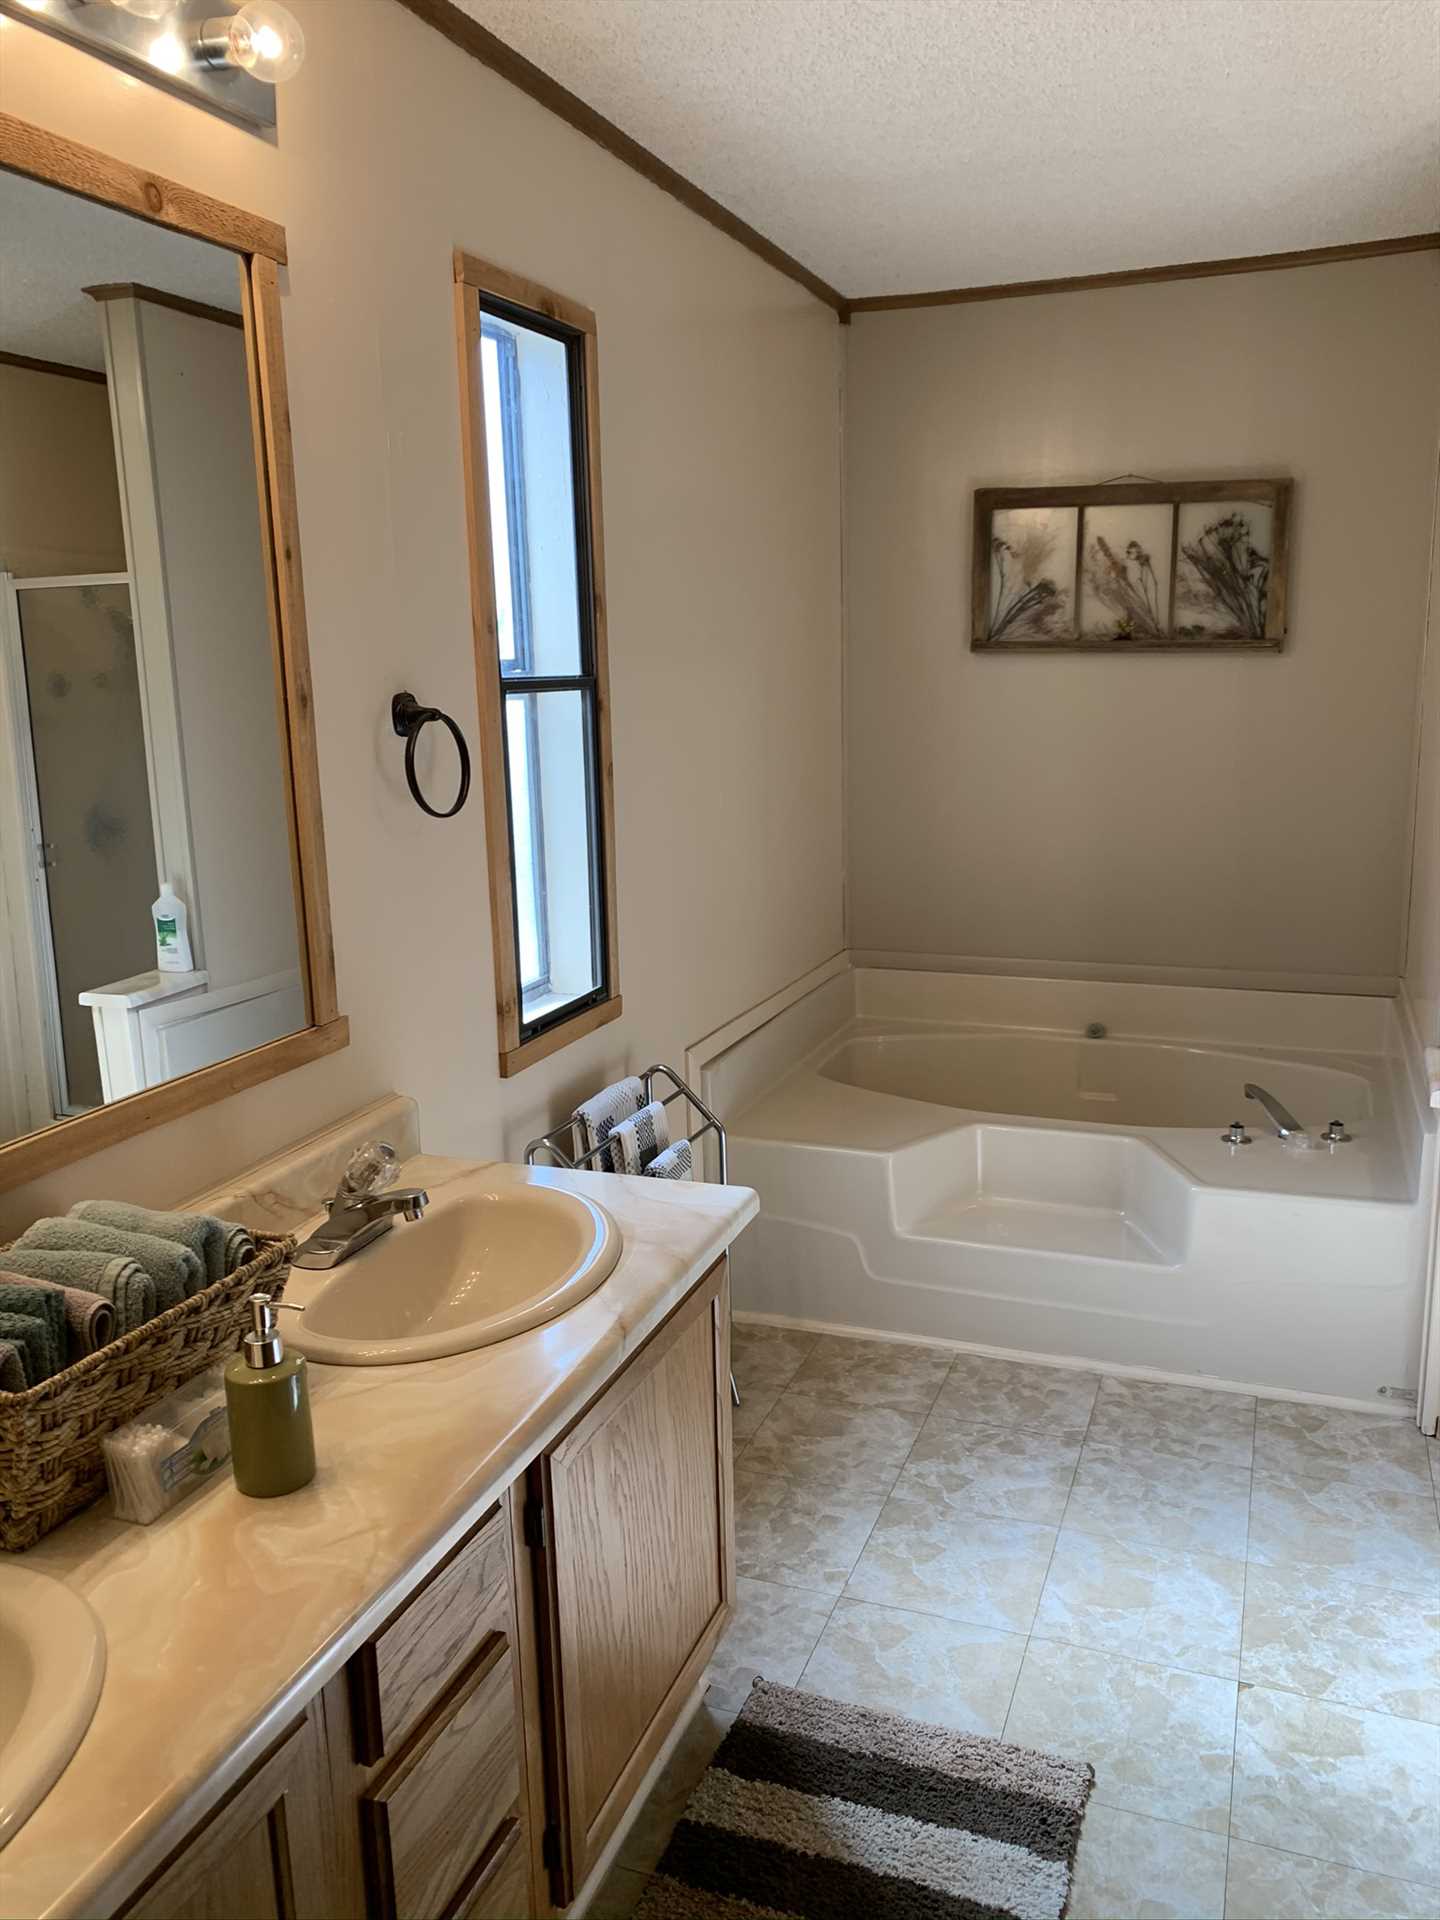                                                 Twin vanities and a luxurious garden tub grace the master bath! There are two full baths in the Lodge, and they're both stocked with fluffy and clean linens.